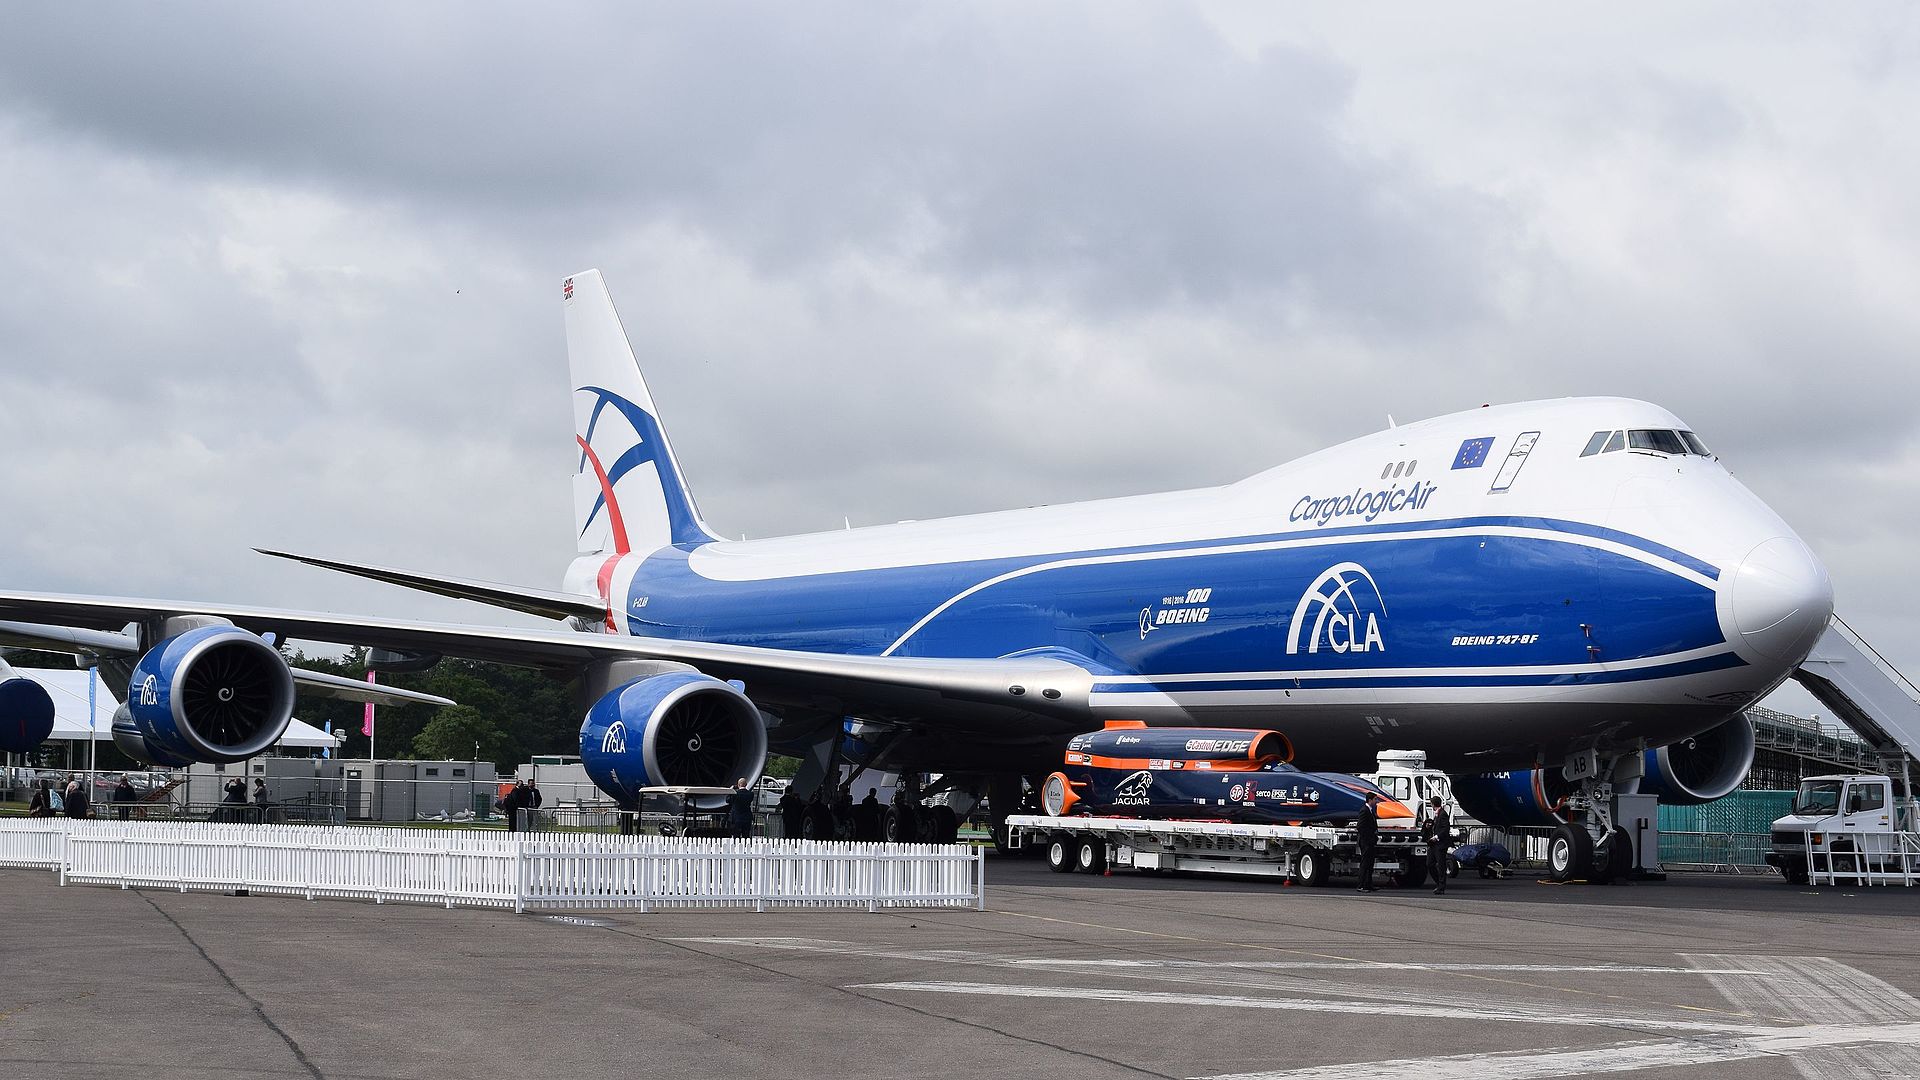 Great Britain's all-cargo airline to launch service from Houston